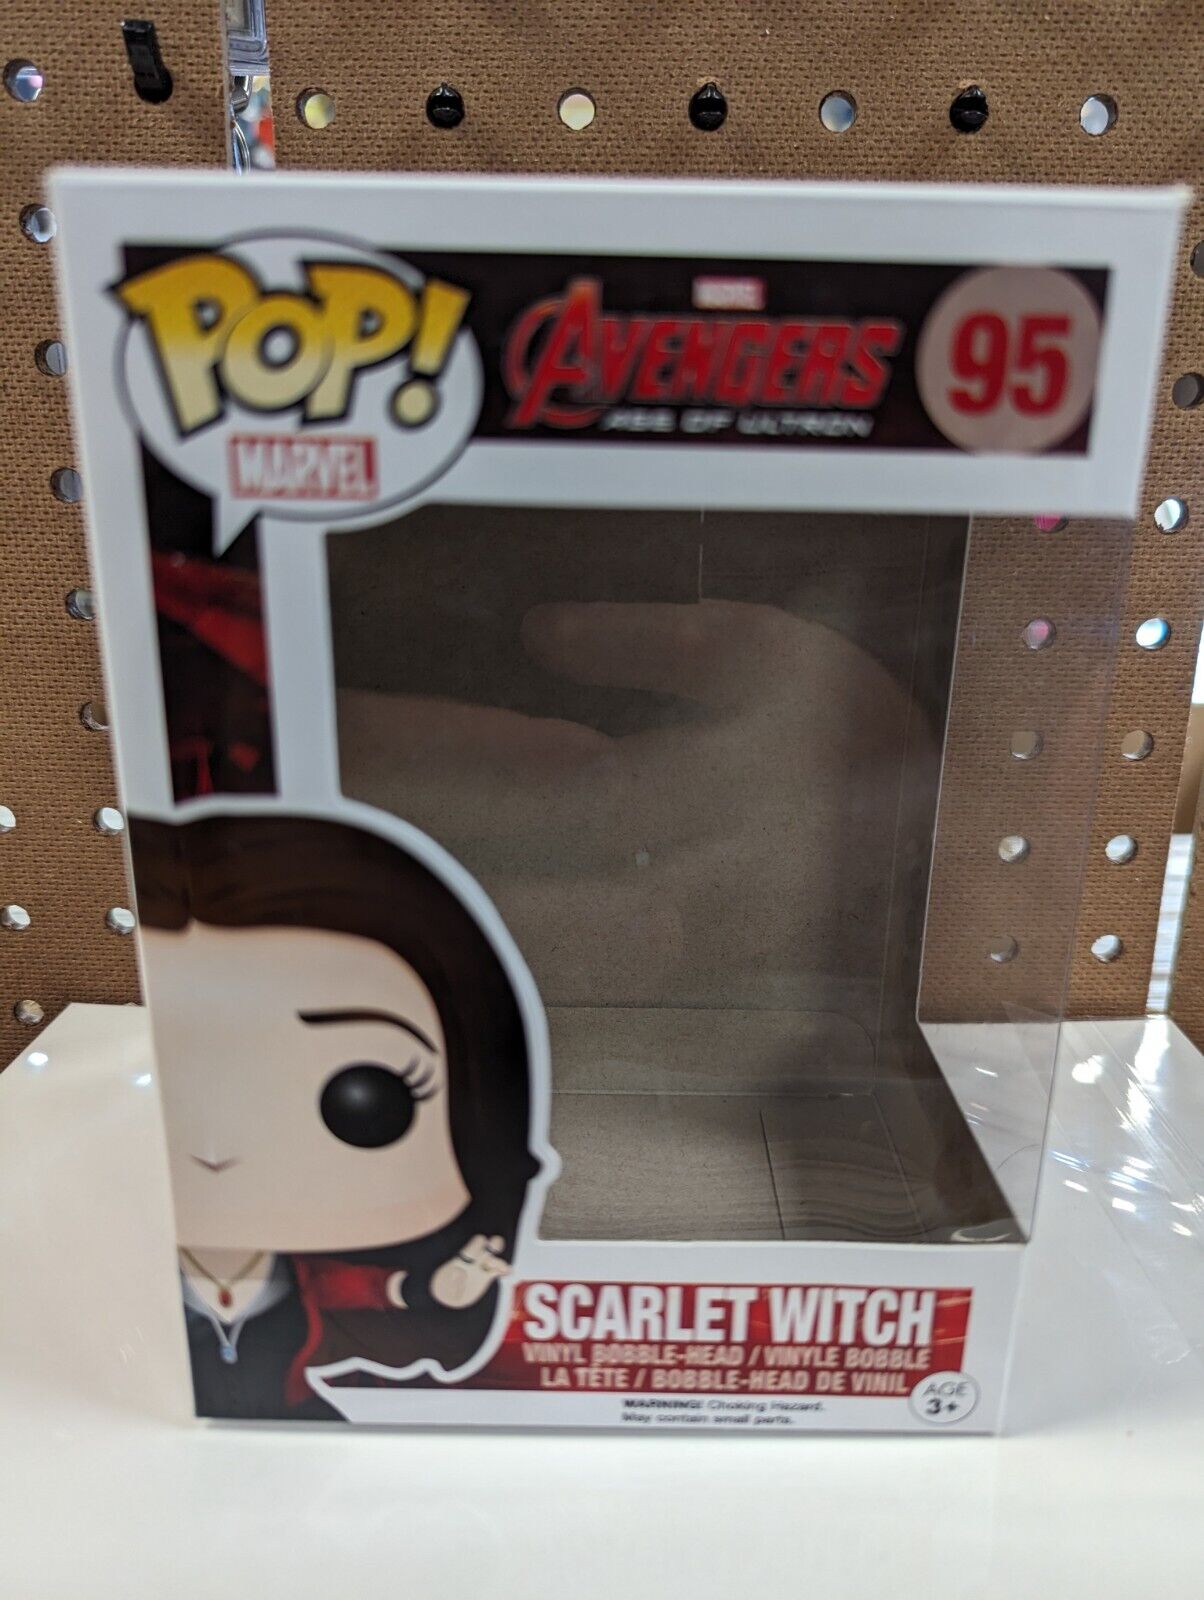 Funko Pop Scarlet Witch 95 Avengers Age of Ultron MISSING INSERT